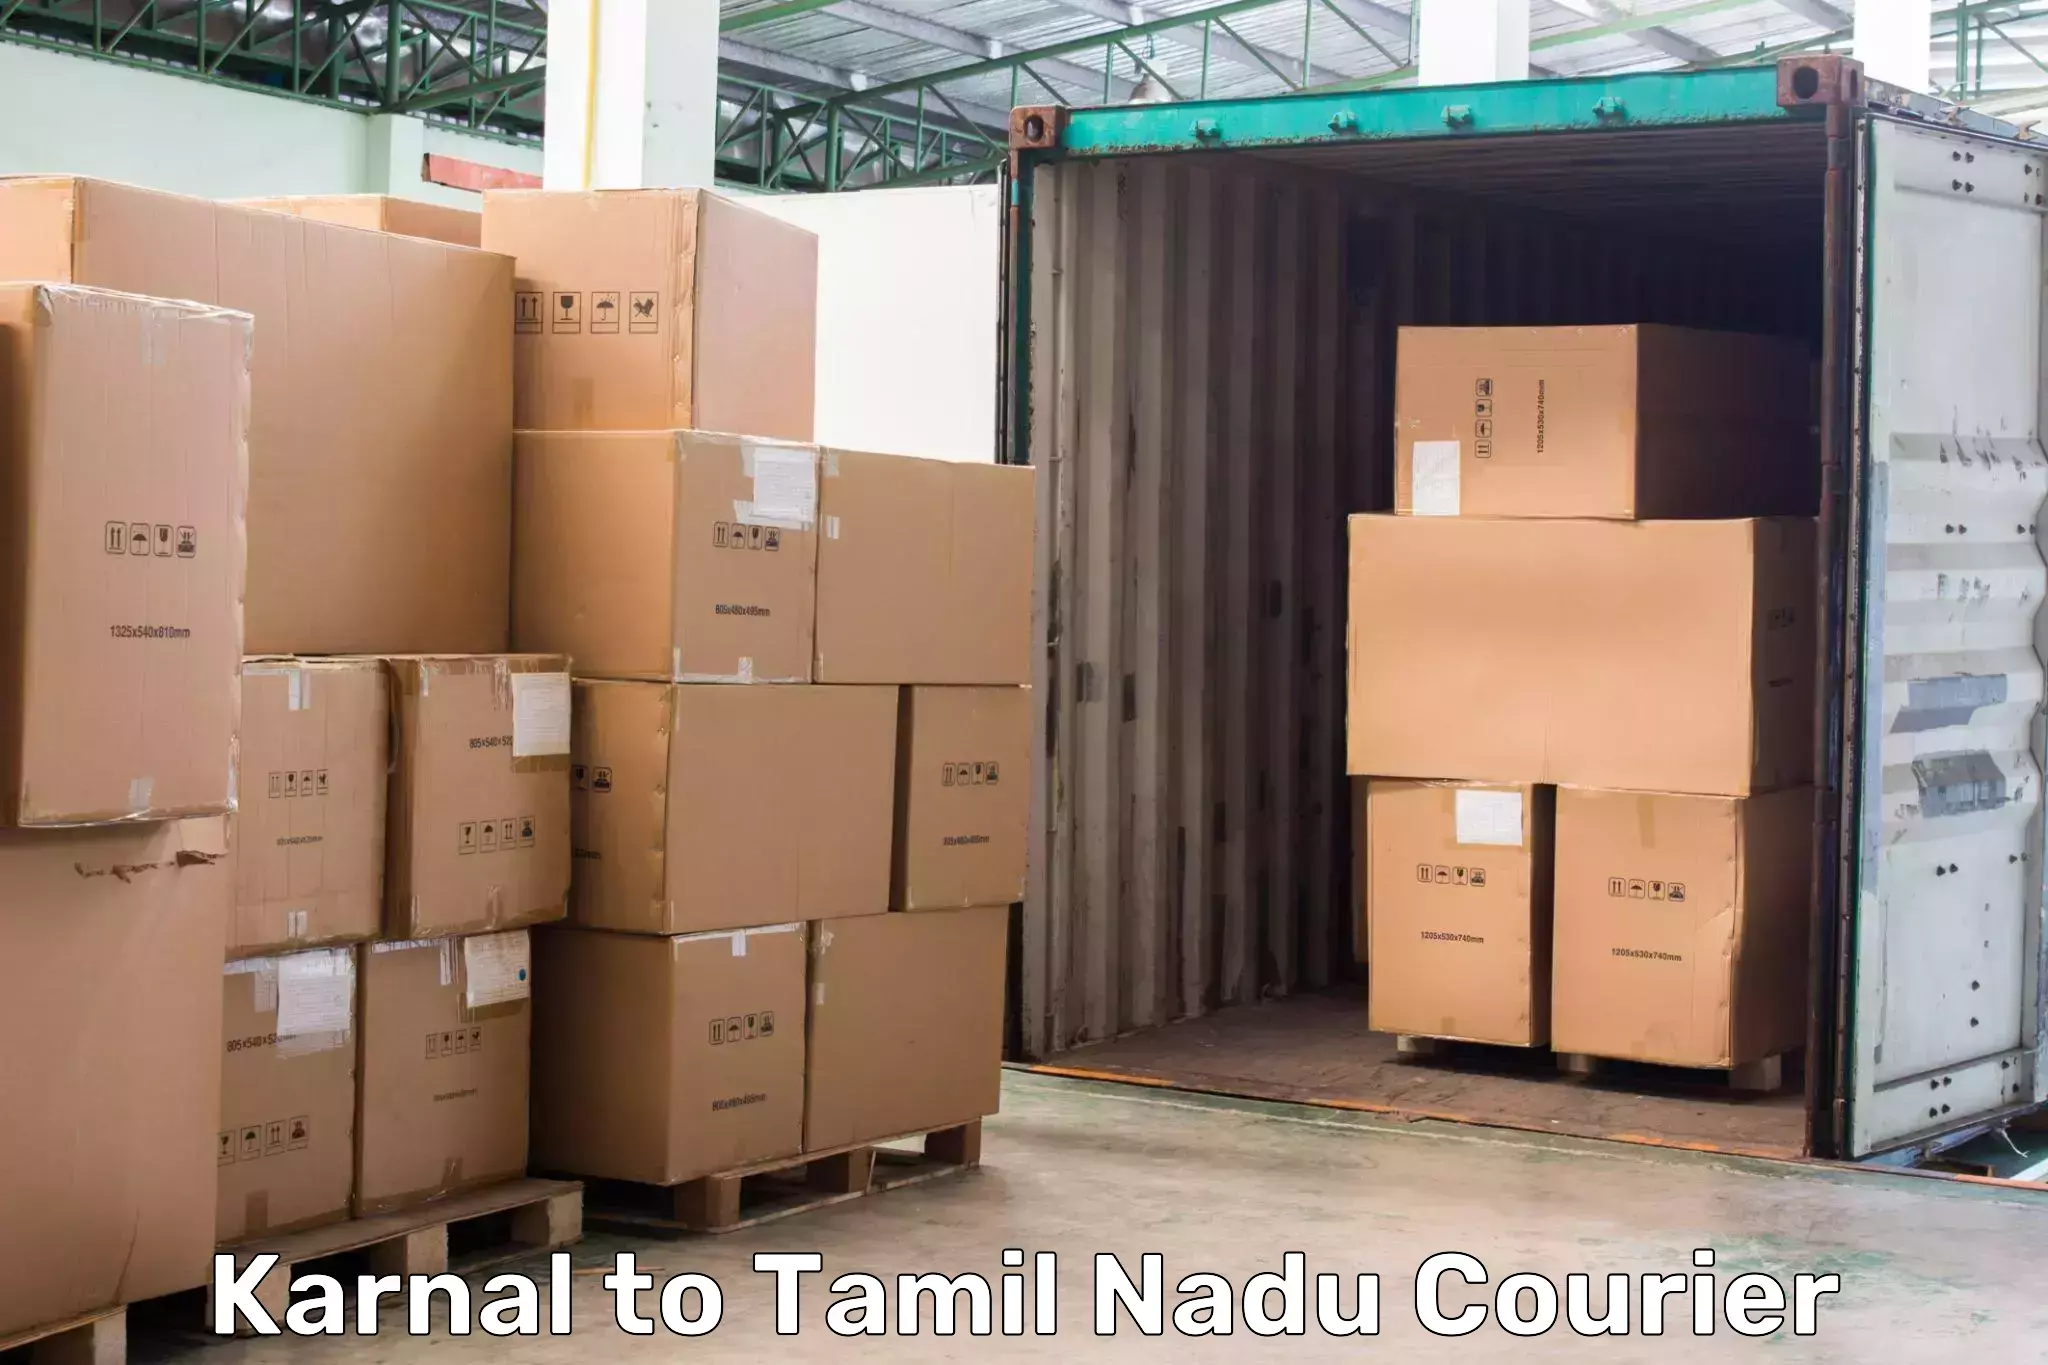 Customer-focused courier Karnal to Gobichettipalayam